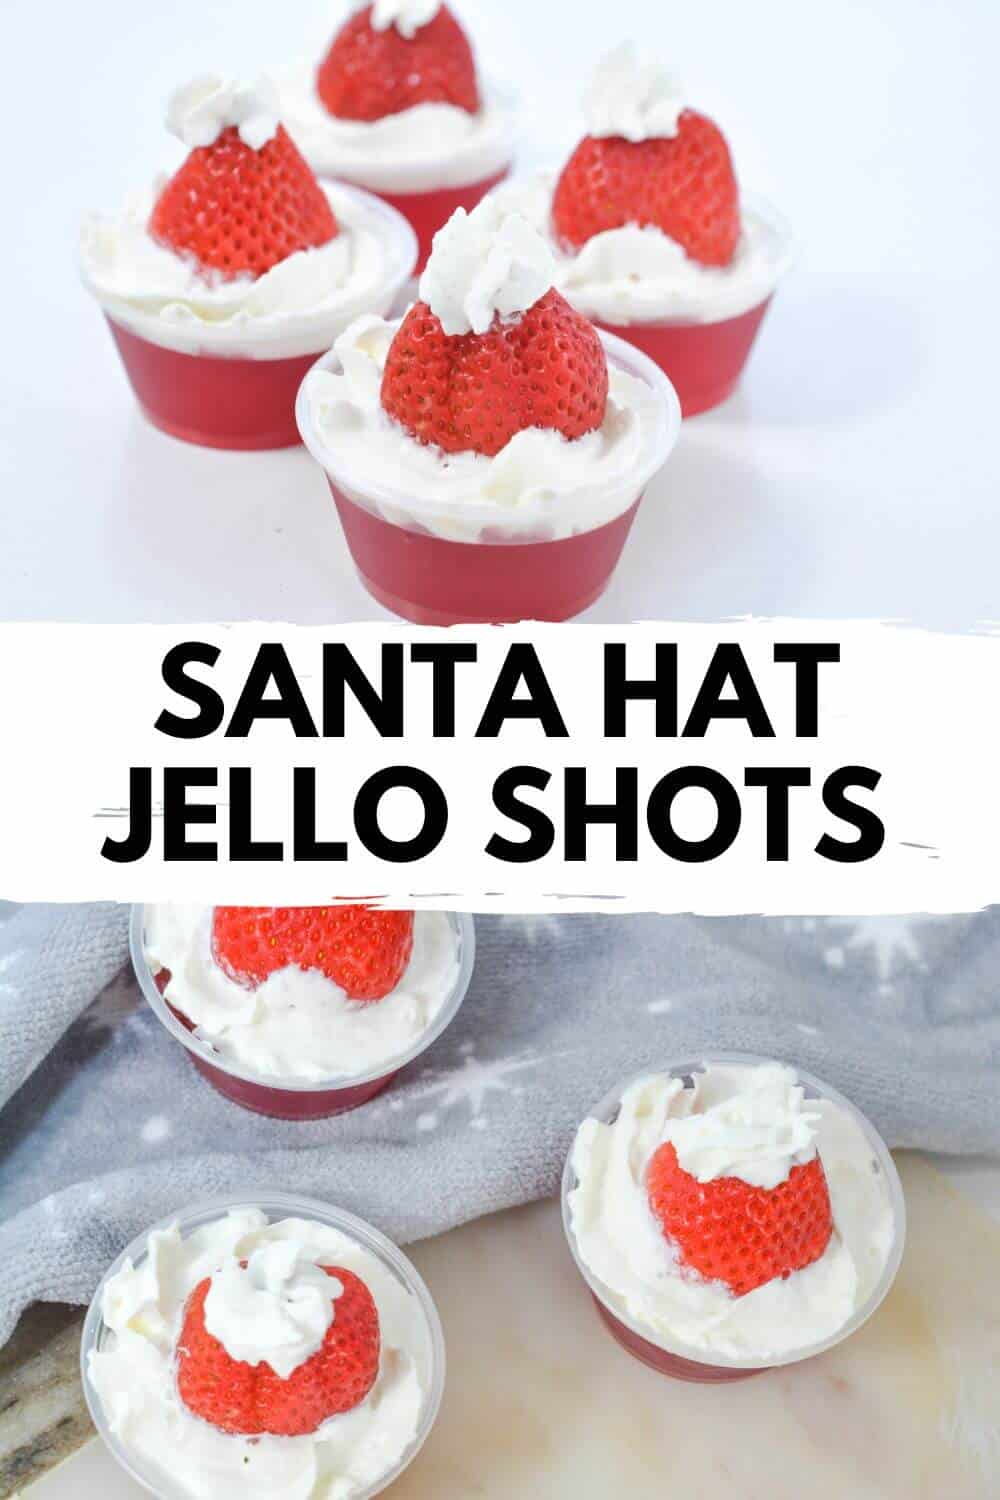 Santa hat jello shots are a festive and fun twist on your traditional jello shots. These adorable little treats combine the delightful flavors of fruity jello with the iconic look of Santa's hat. Perfect